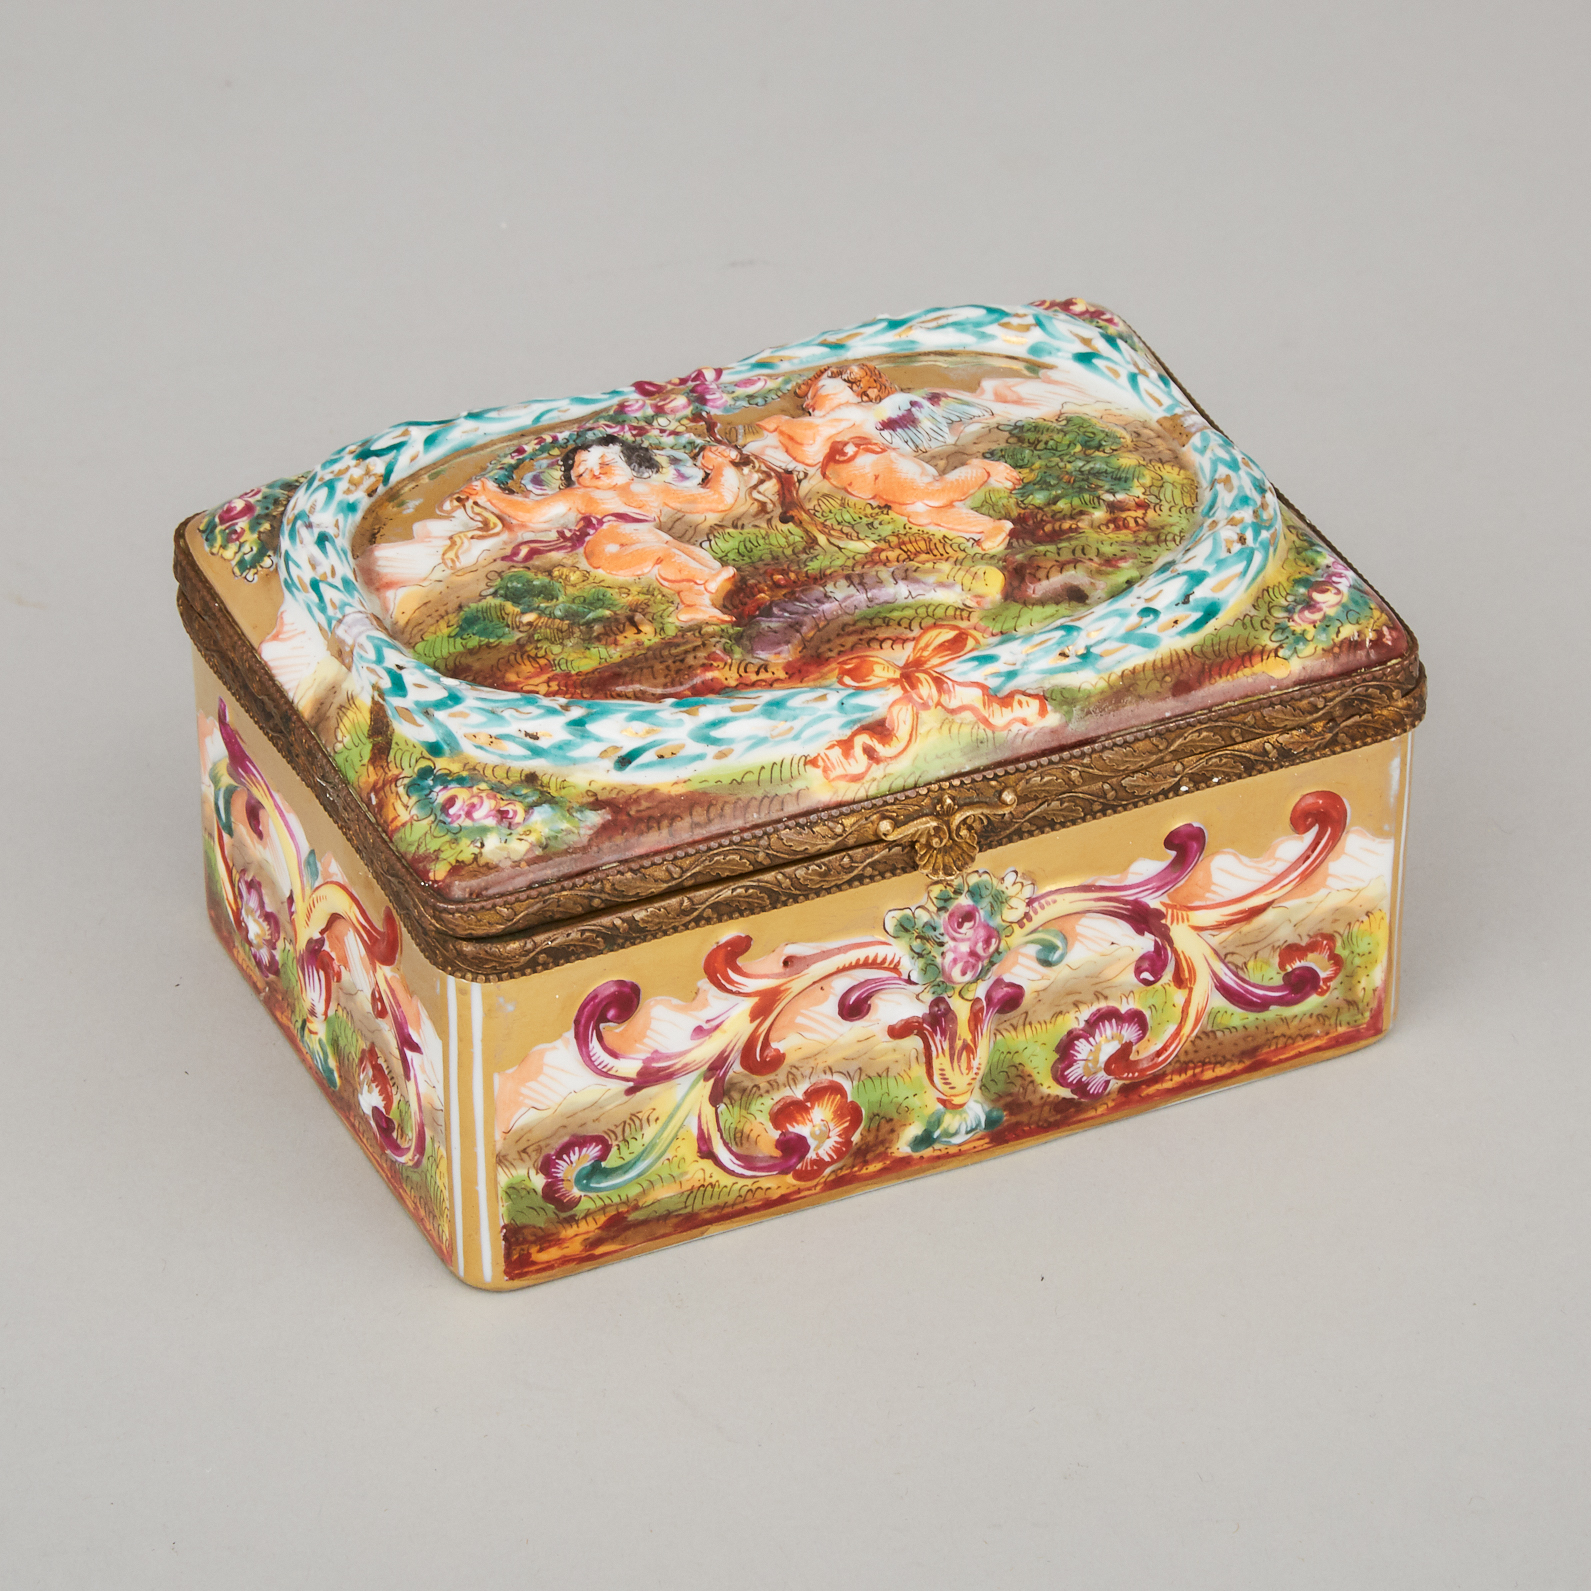 'Naples' Rectangular Casket, late 19th/early 20th century